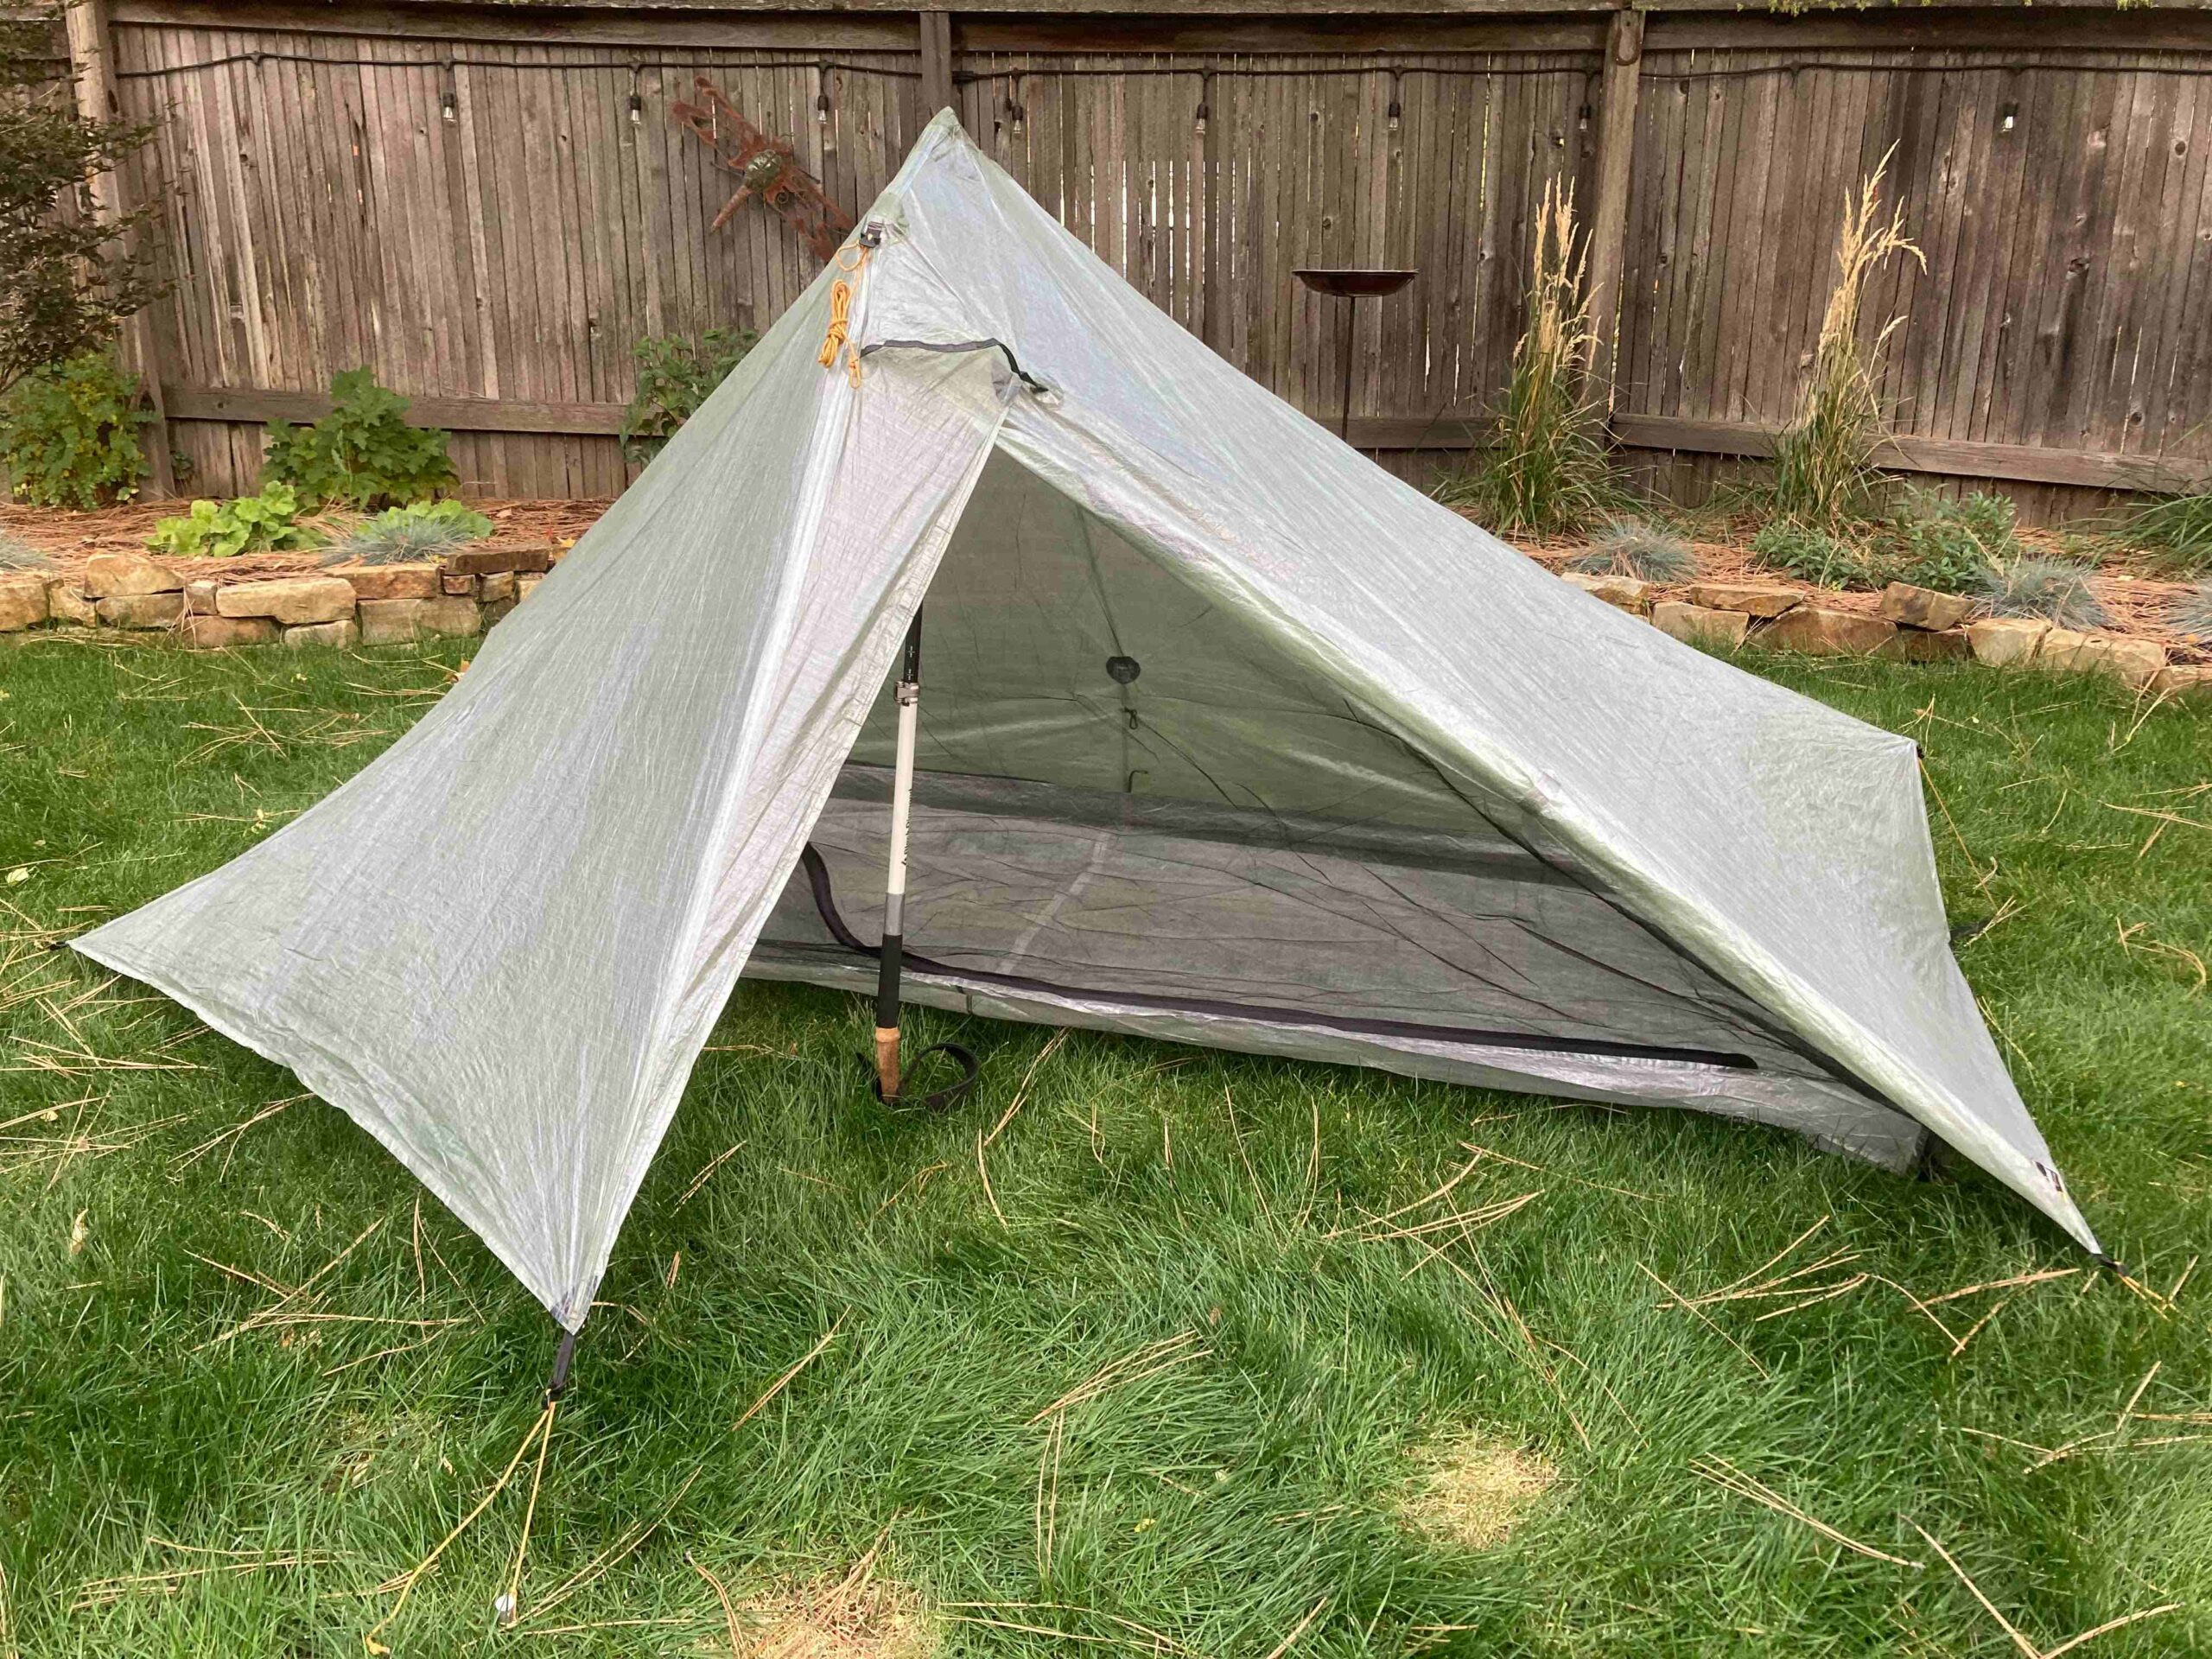 Barely Used Tarptent Aeon Li (2019 version) - Backpacking Light